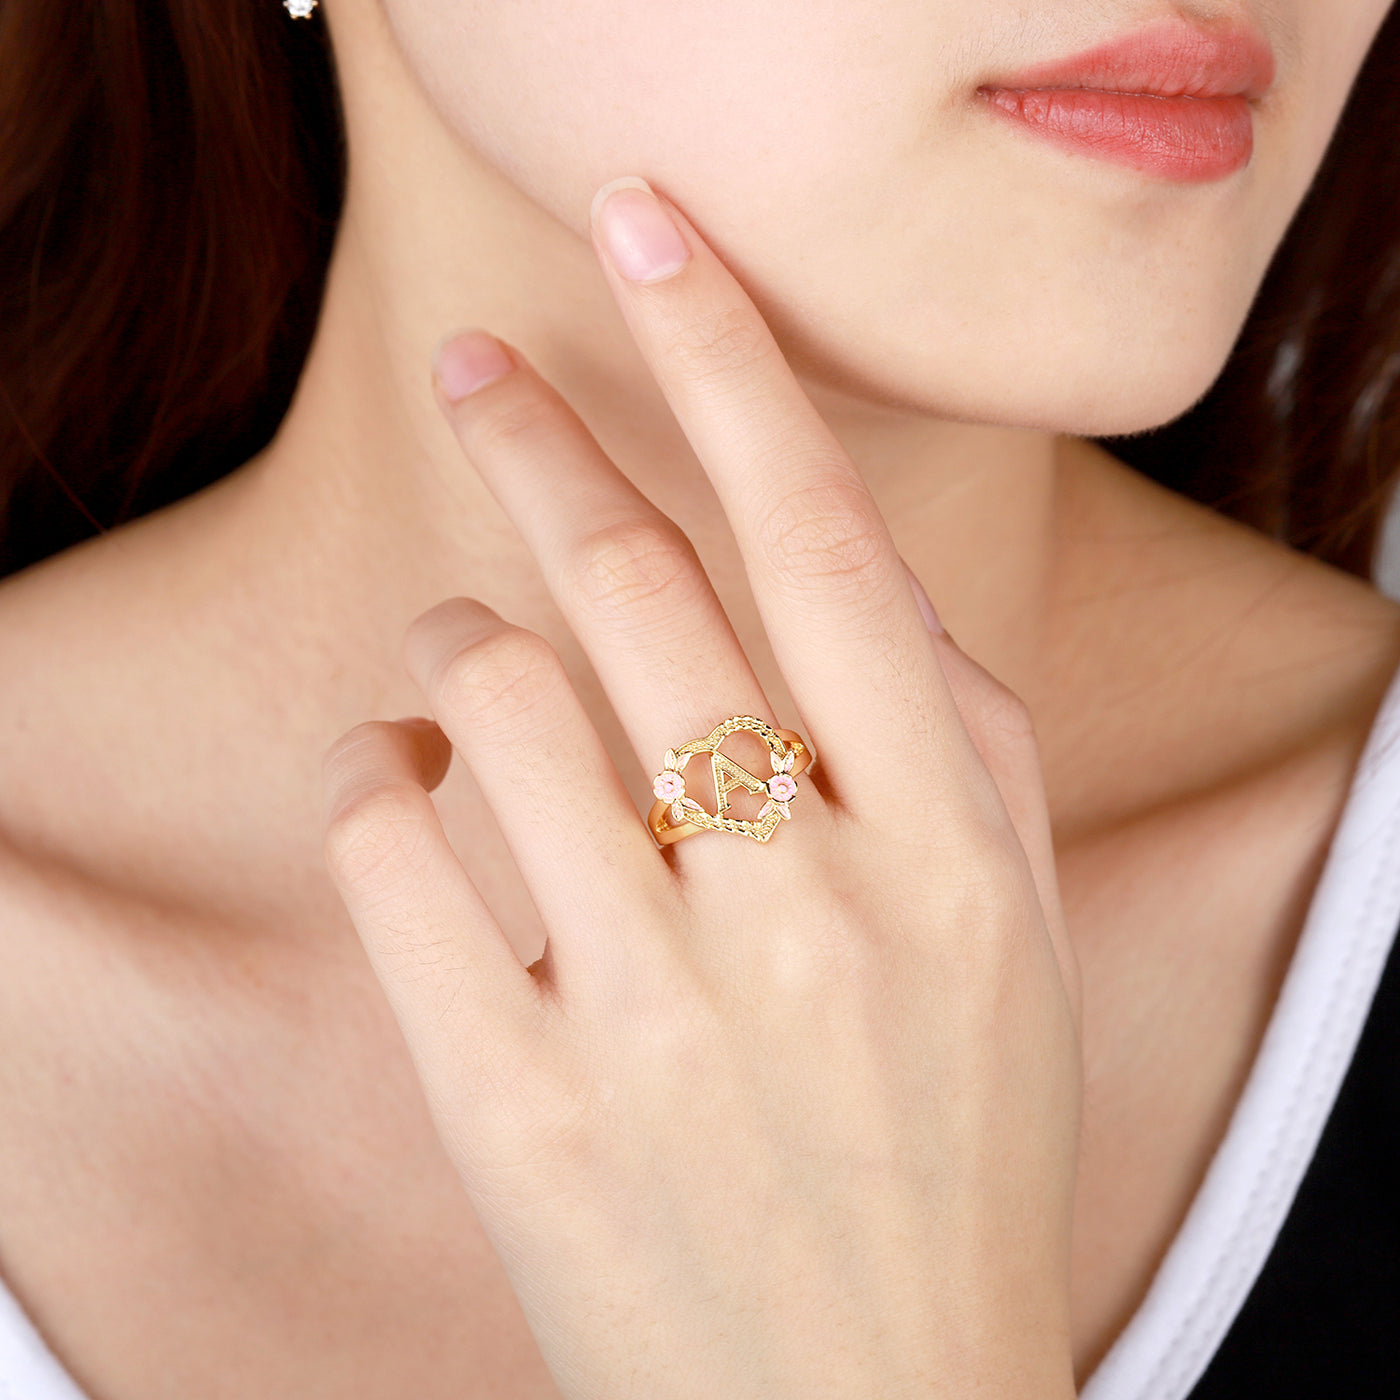 The Layla initial ring